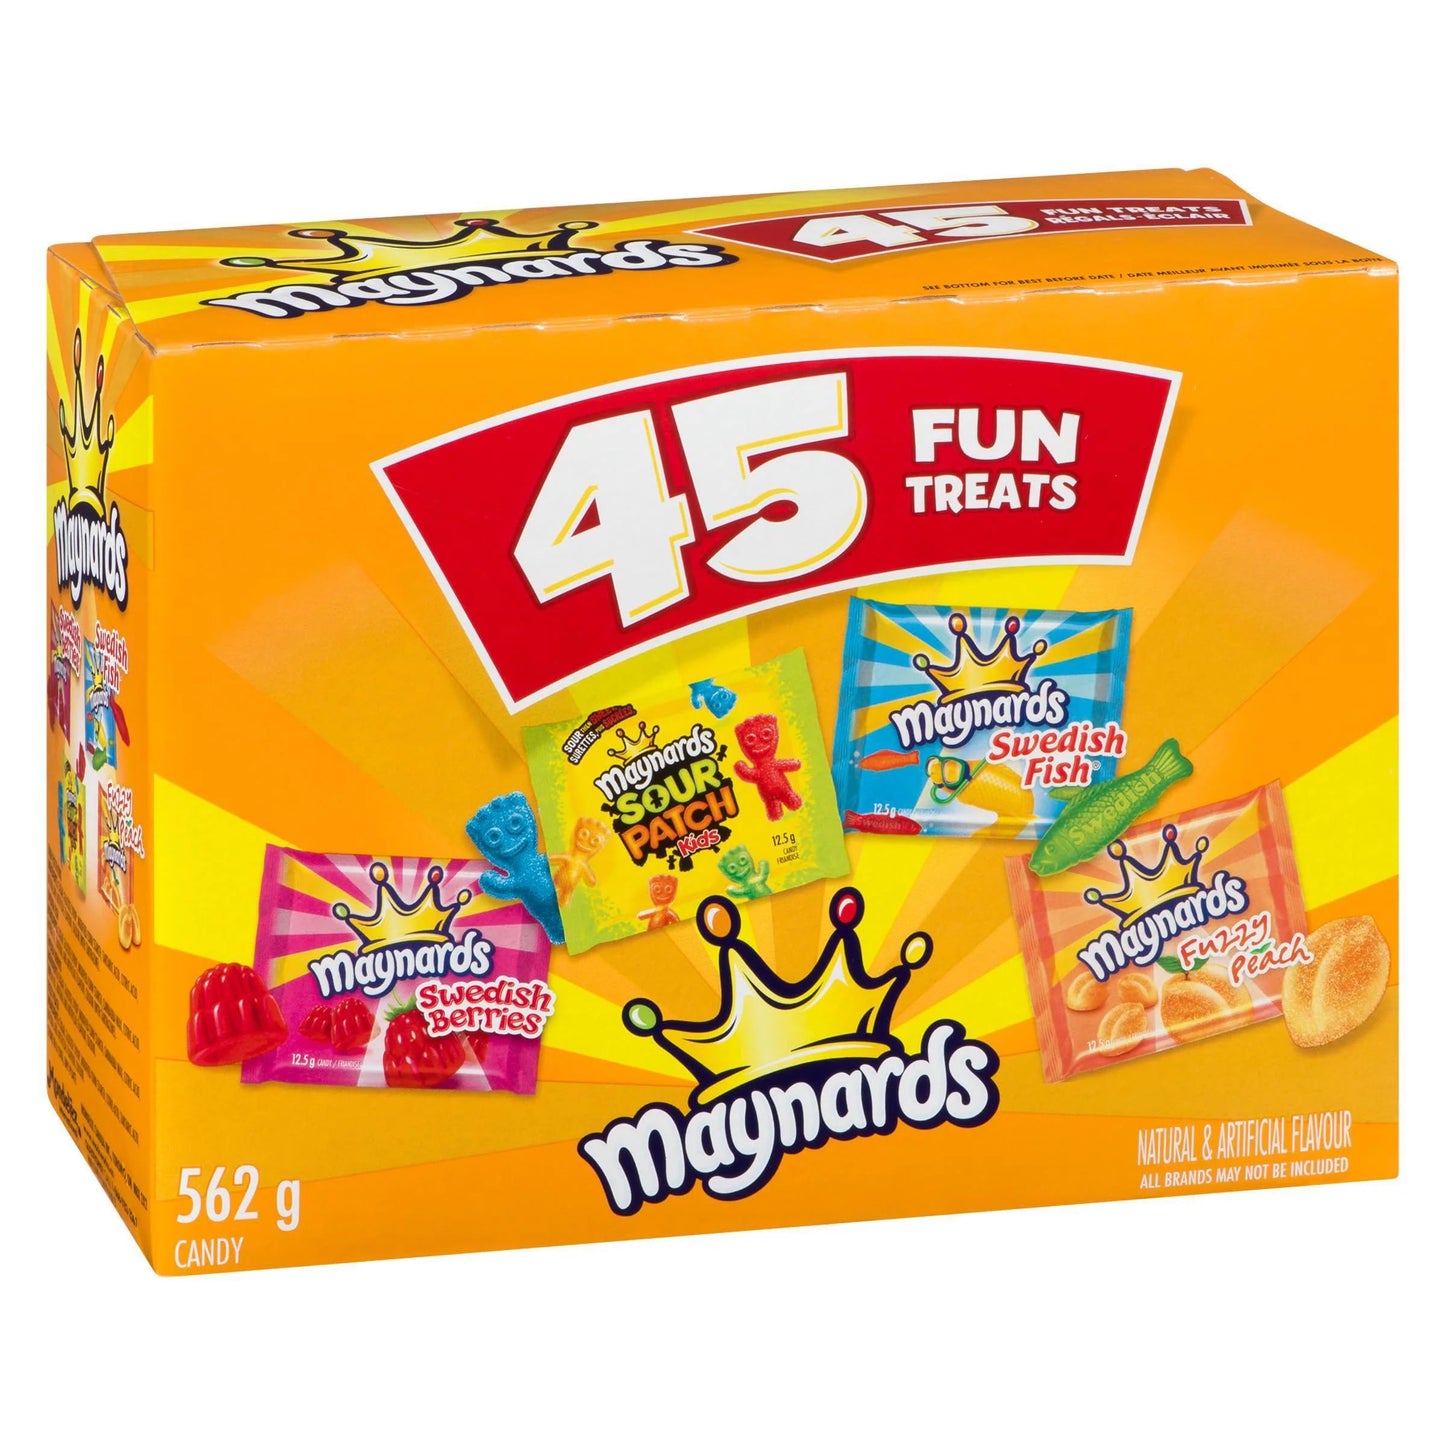 Maynards Candy Assorted Fun Treats Candy 562g/19.82oz (Shipped from Canada)